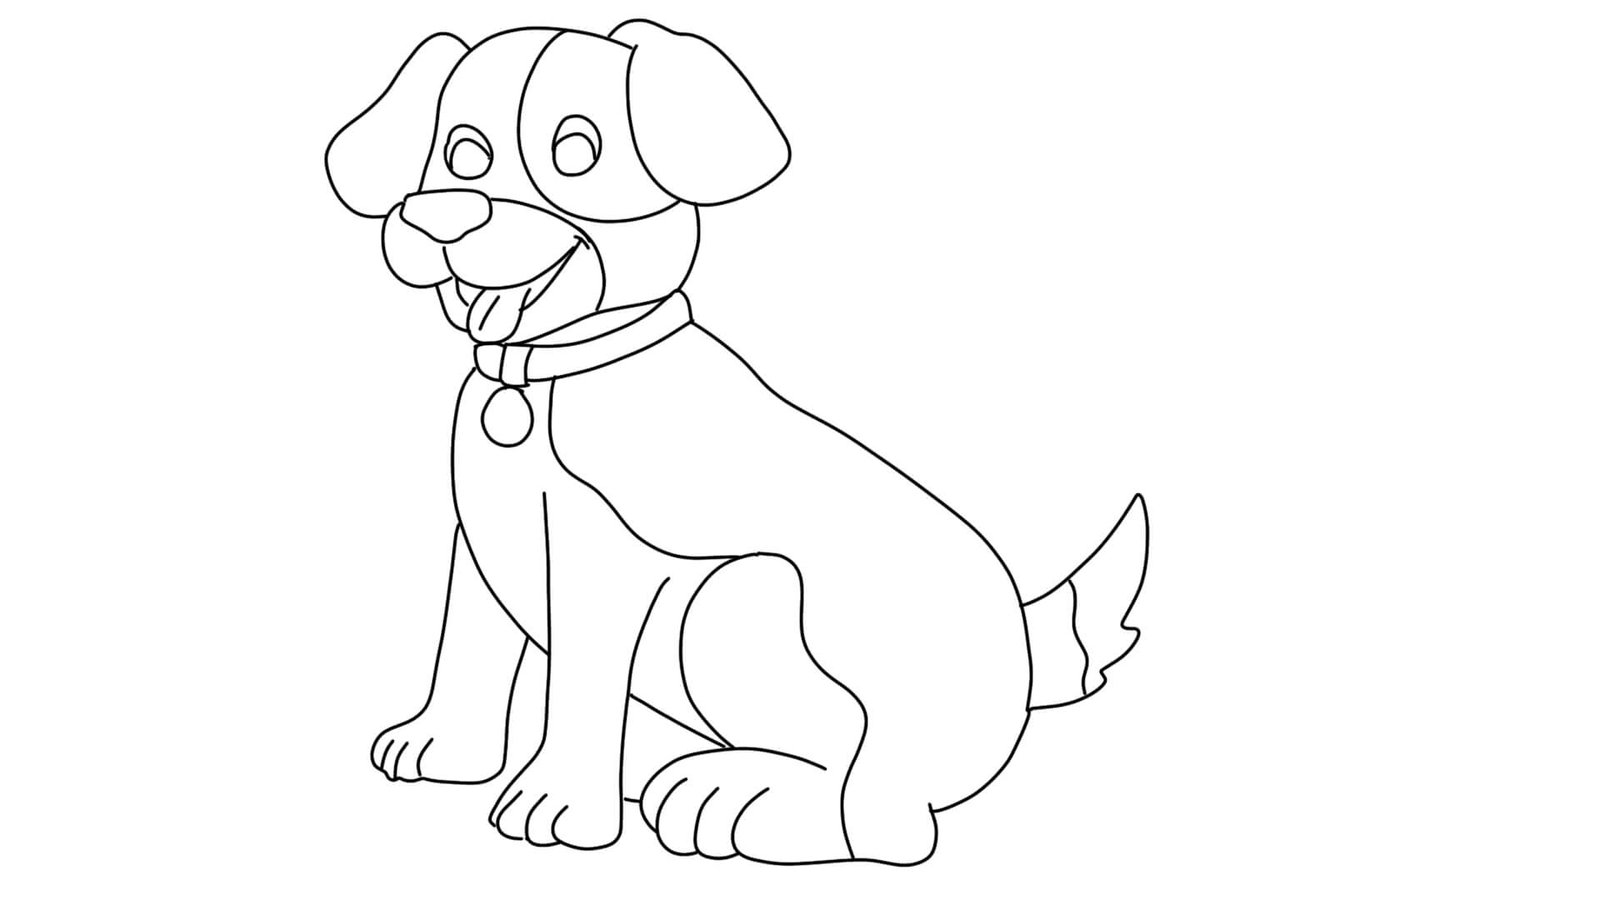 Rottweiler Dog Coloring Page